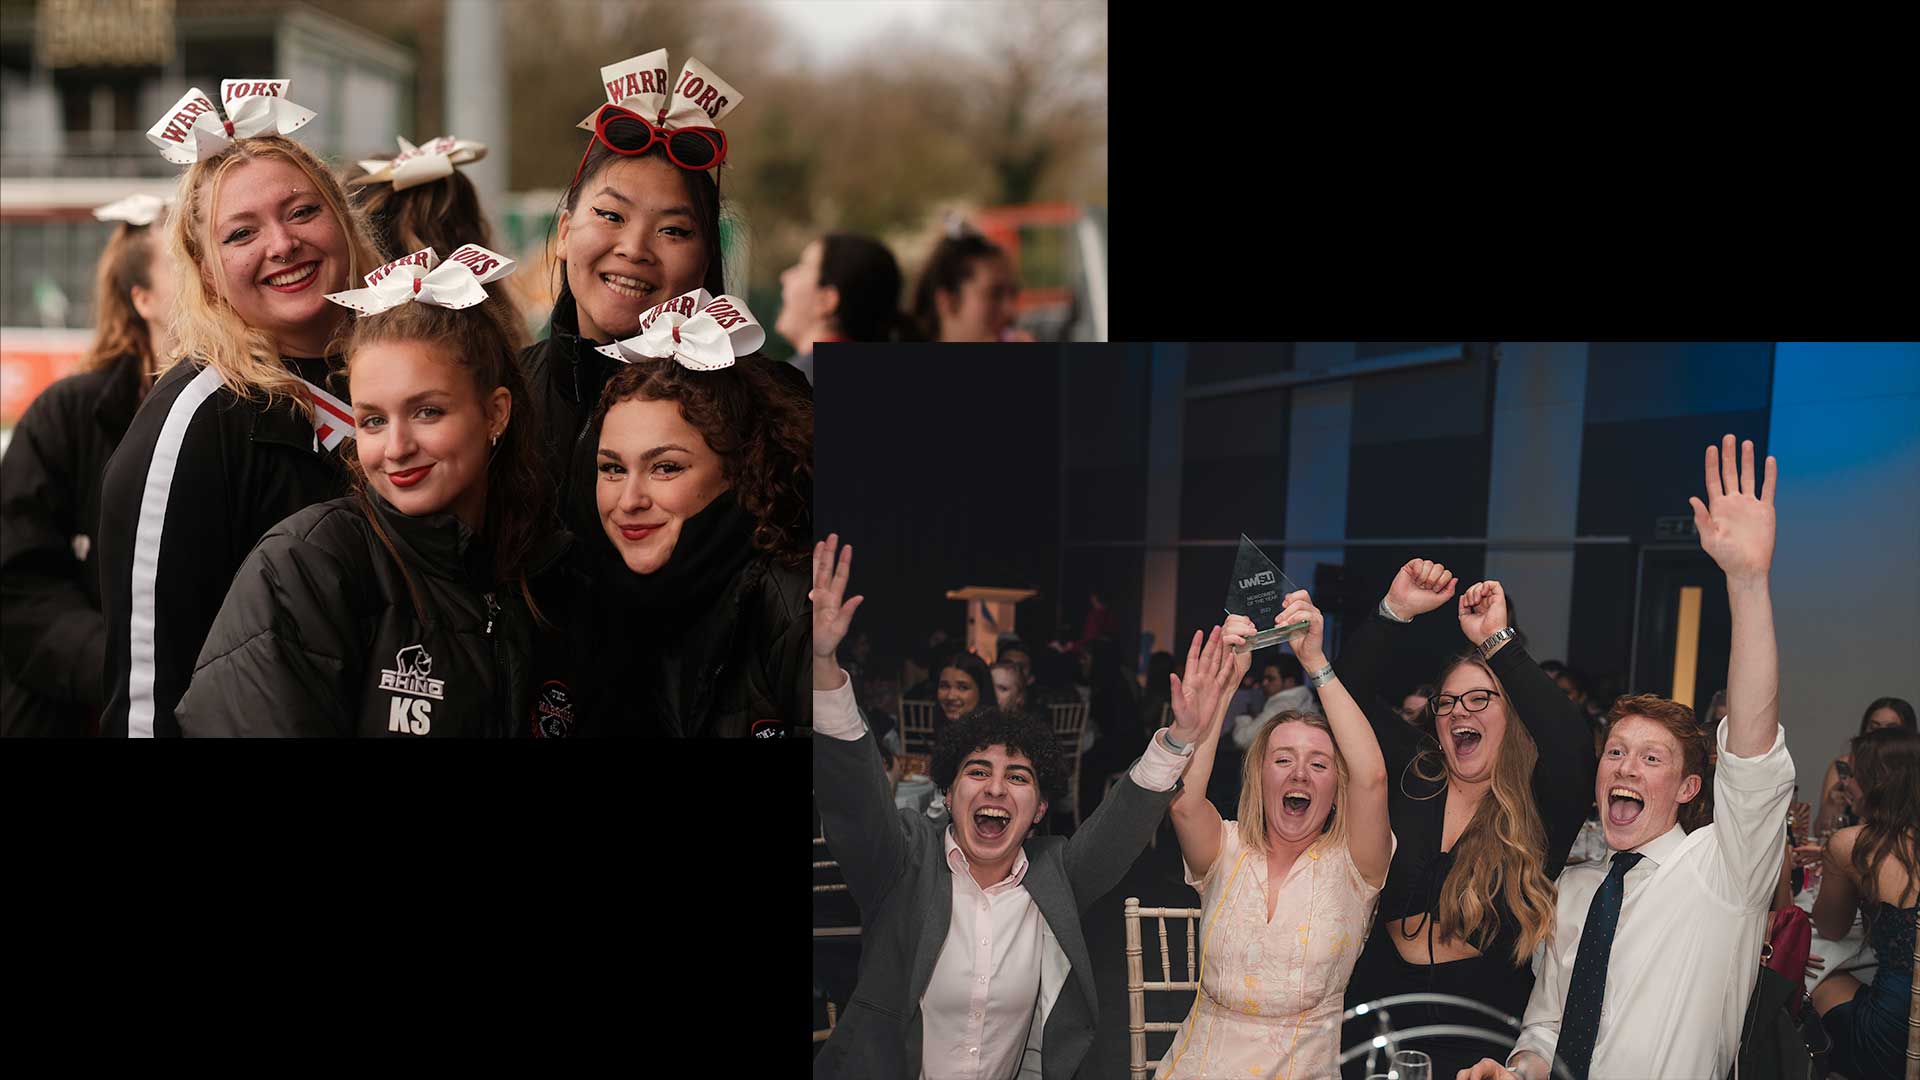 Two photographs overlapping each other in a collage, showing a team of cheerleaders smiling at the camera and a society winning an award at a ceremony